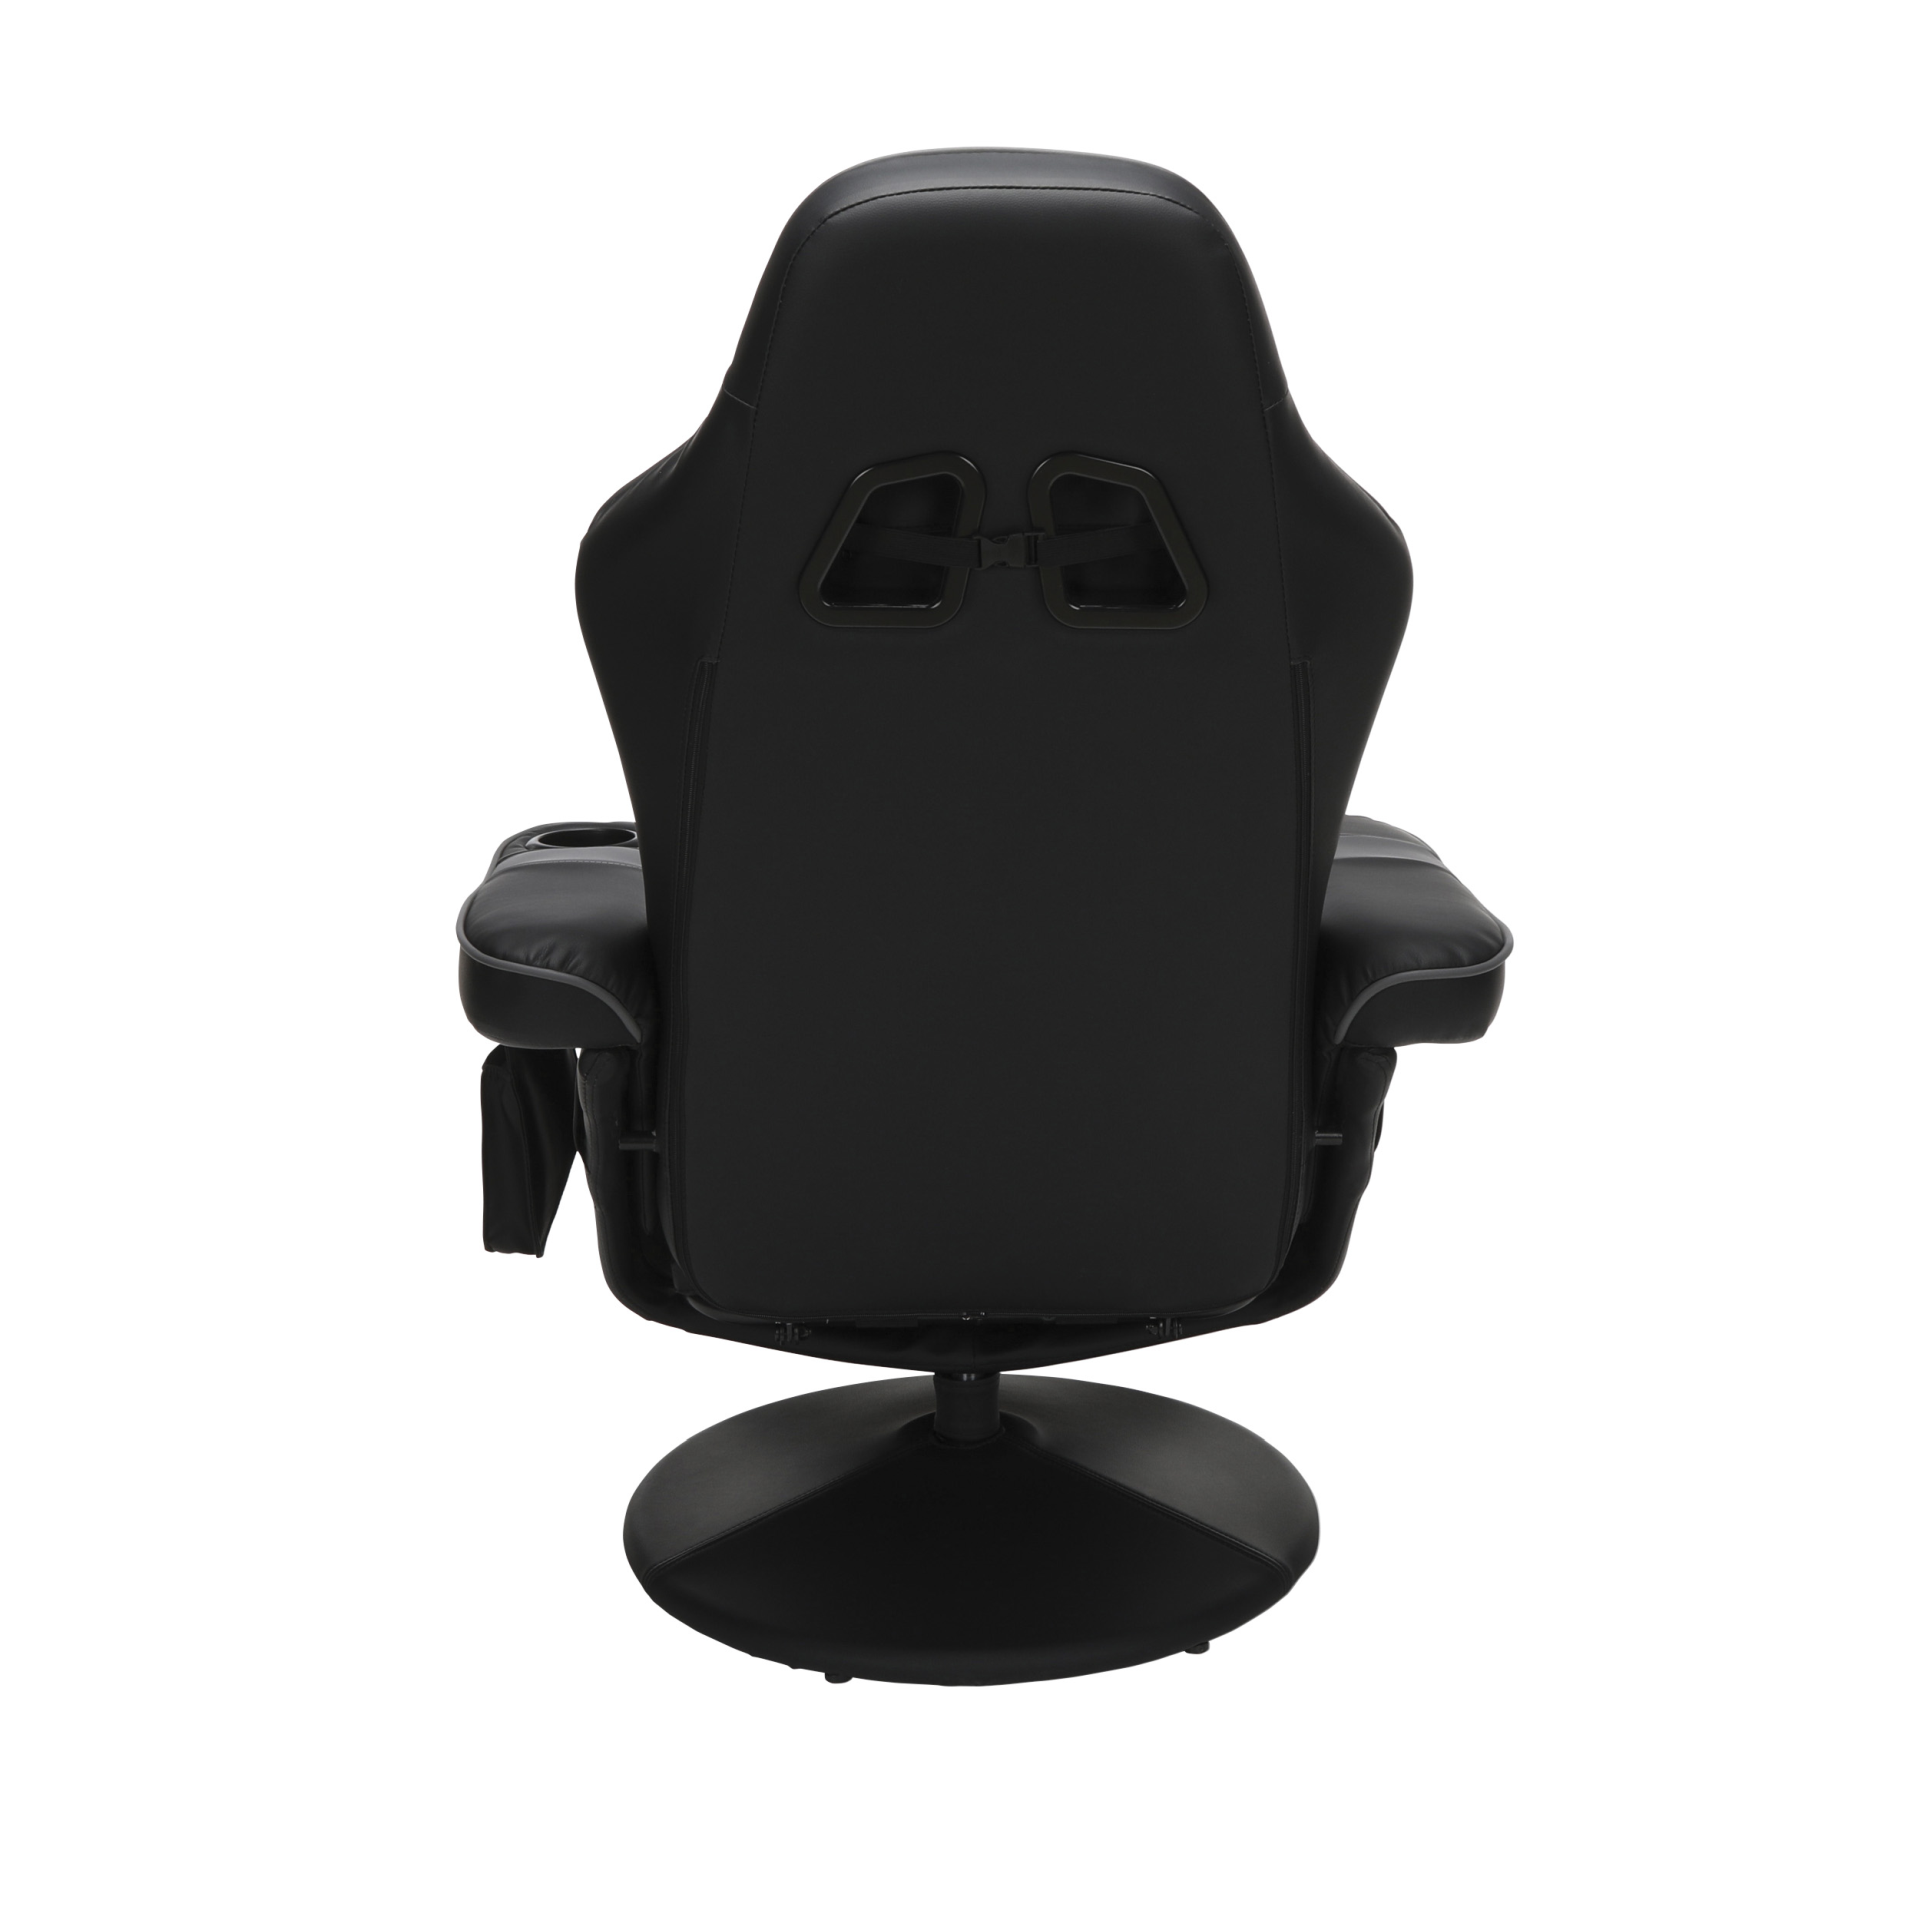 RESPAWN RSP-900 Gaming Recliner #20